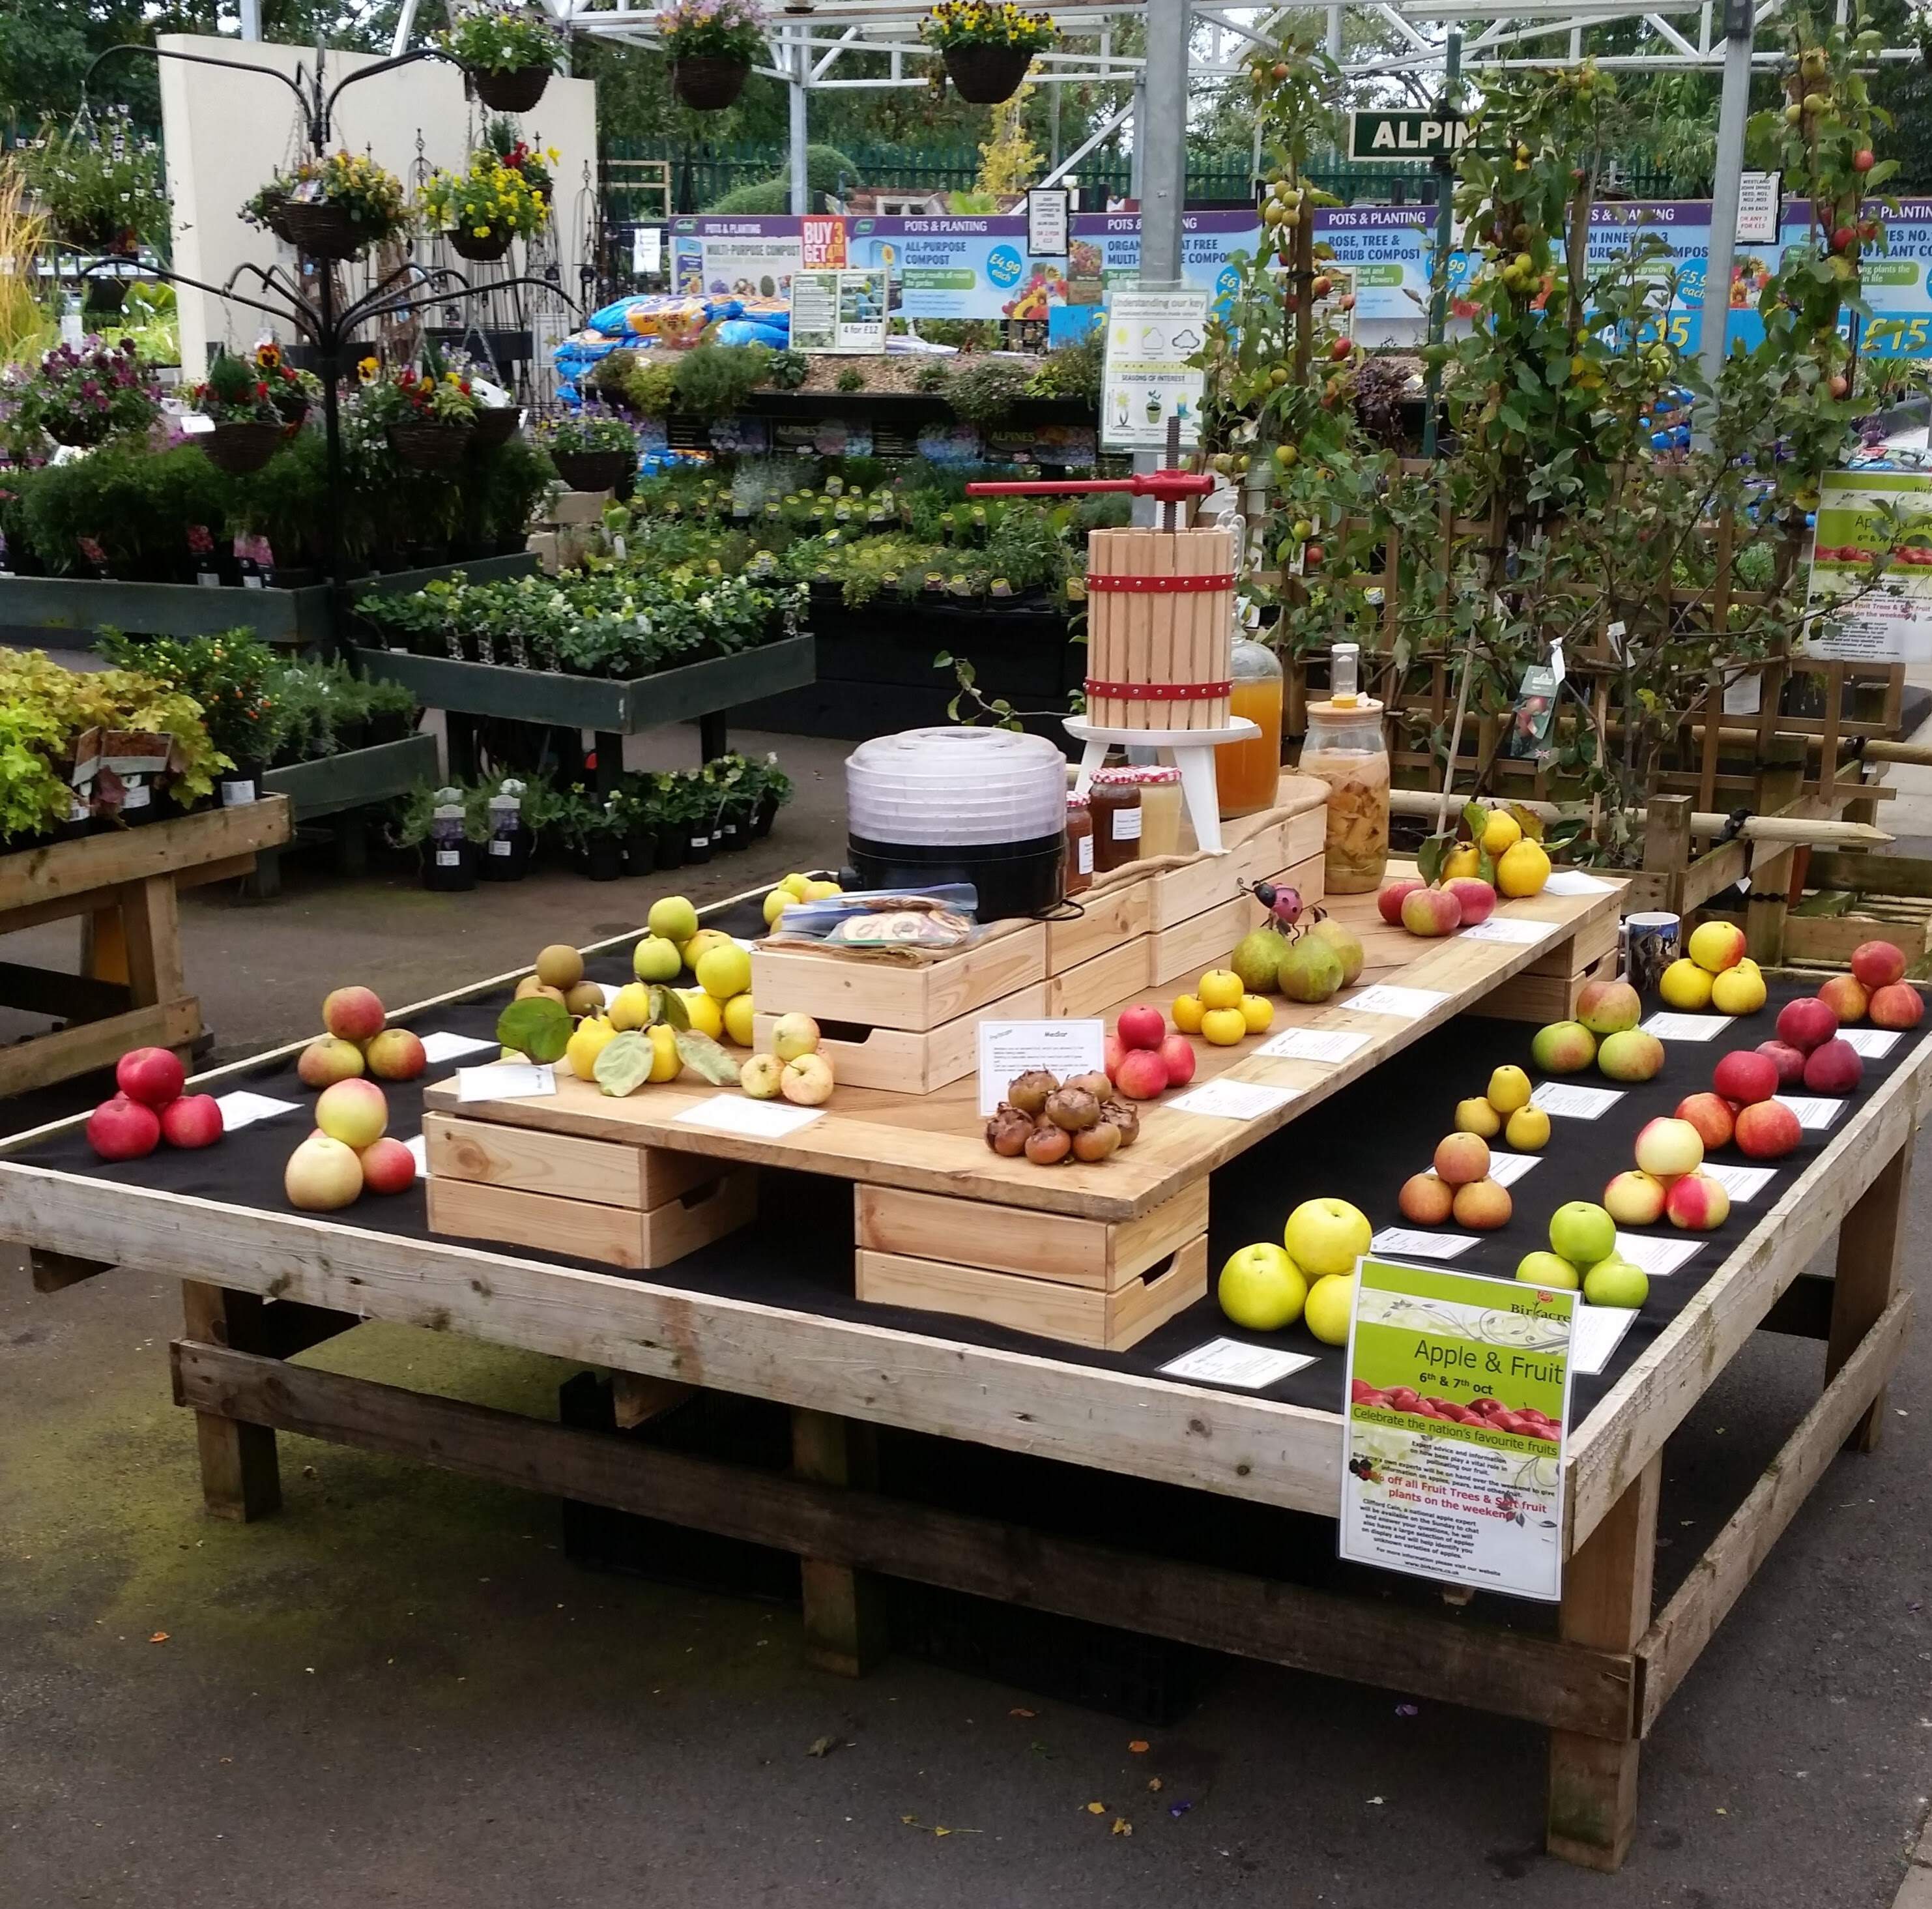 Apple display in early October at  at Birkacre Garden Centre supporting their sale of fruit trees